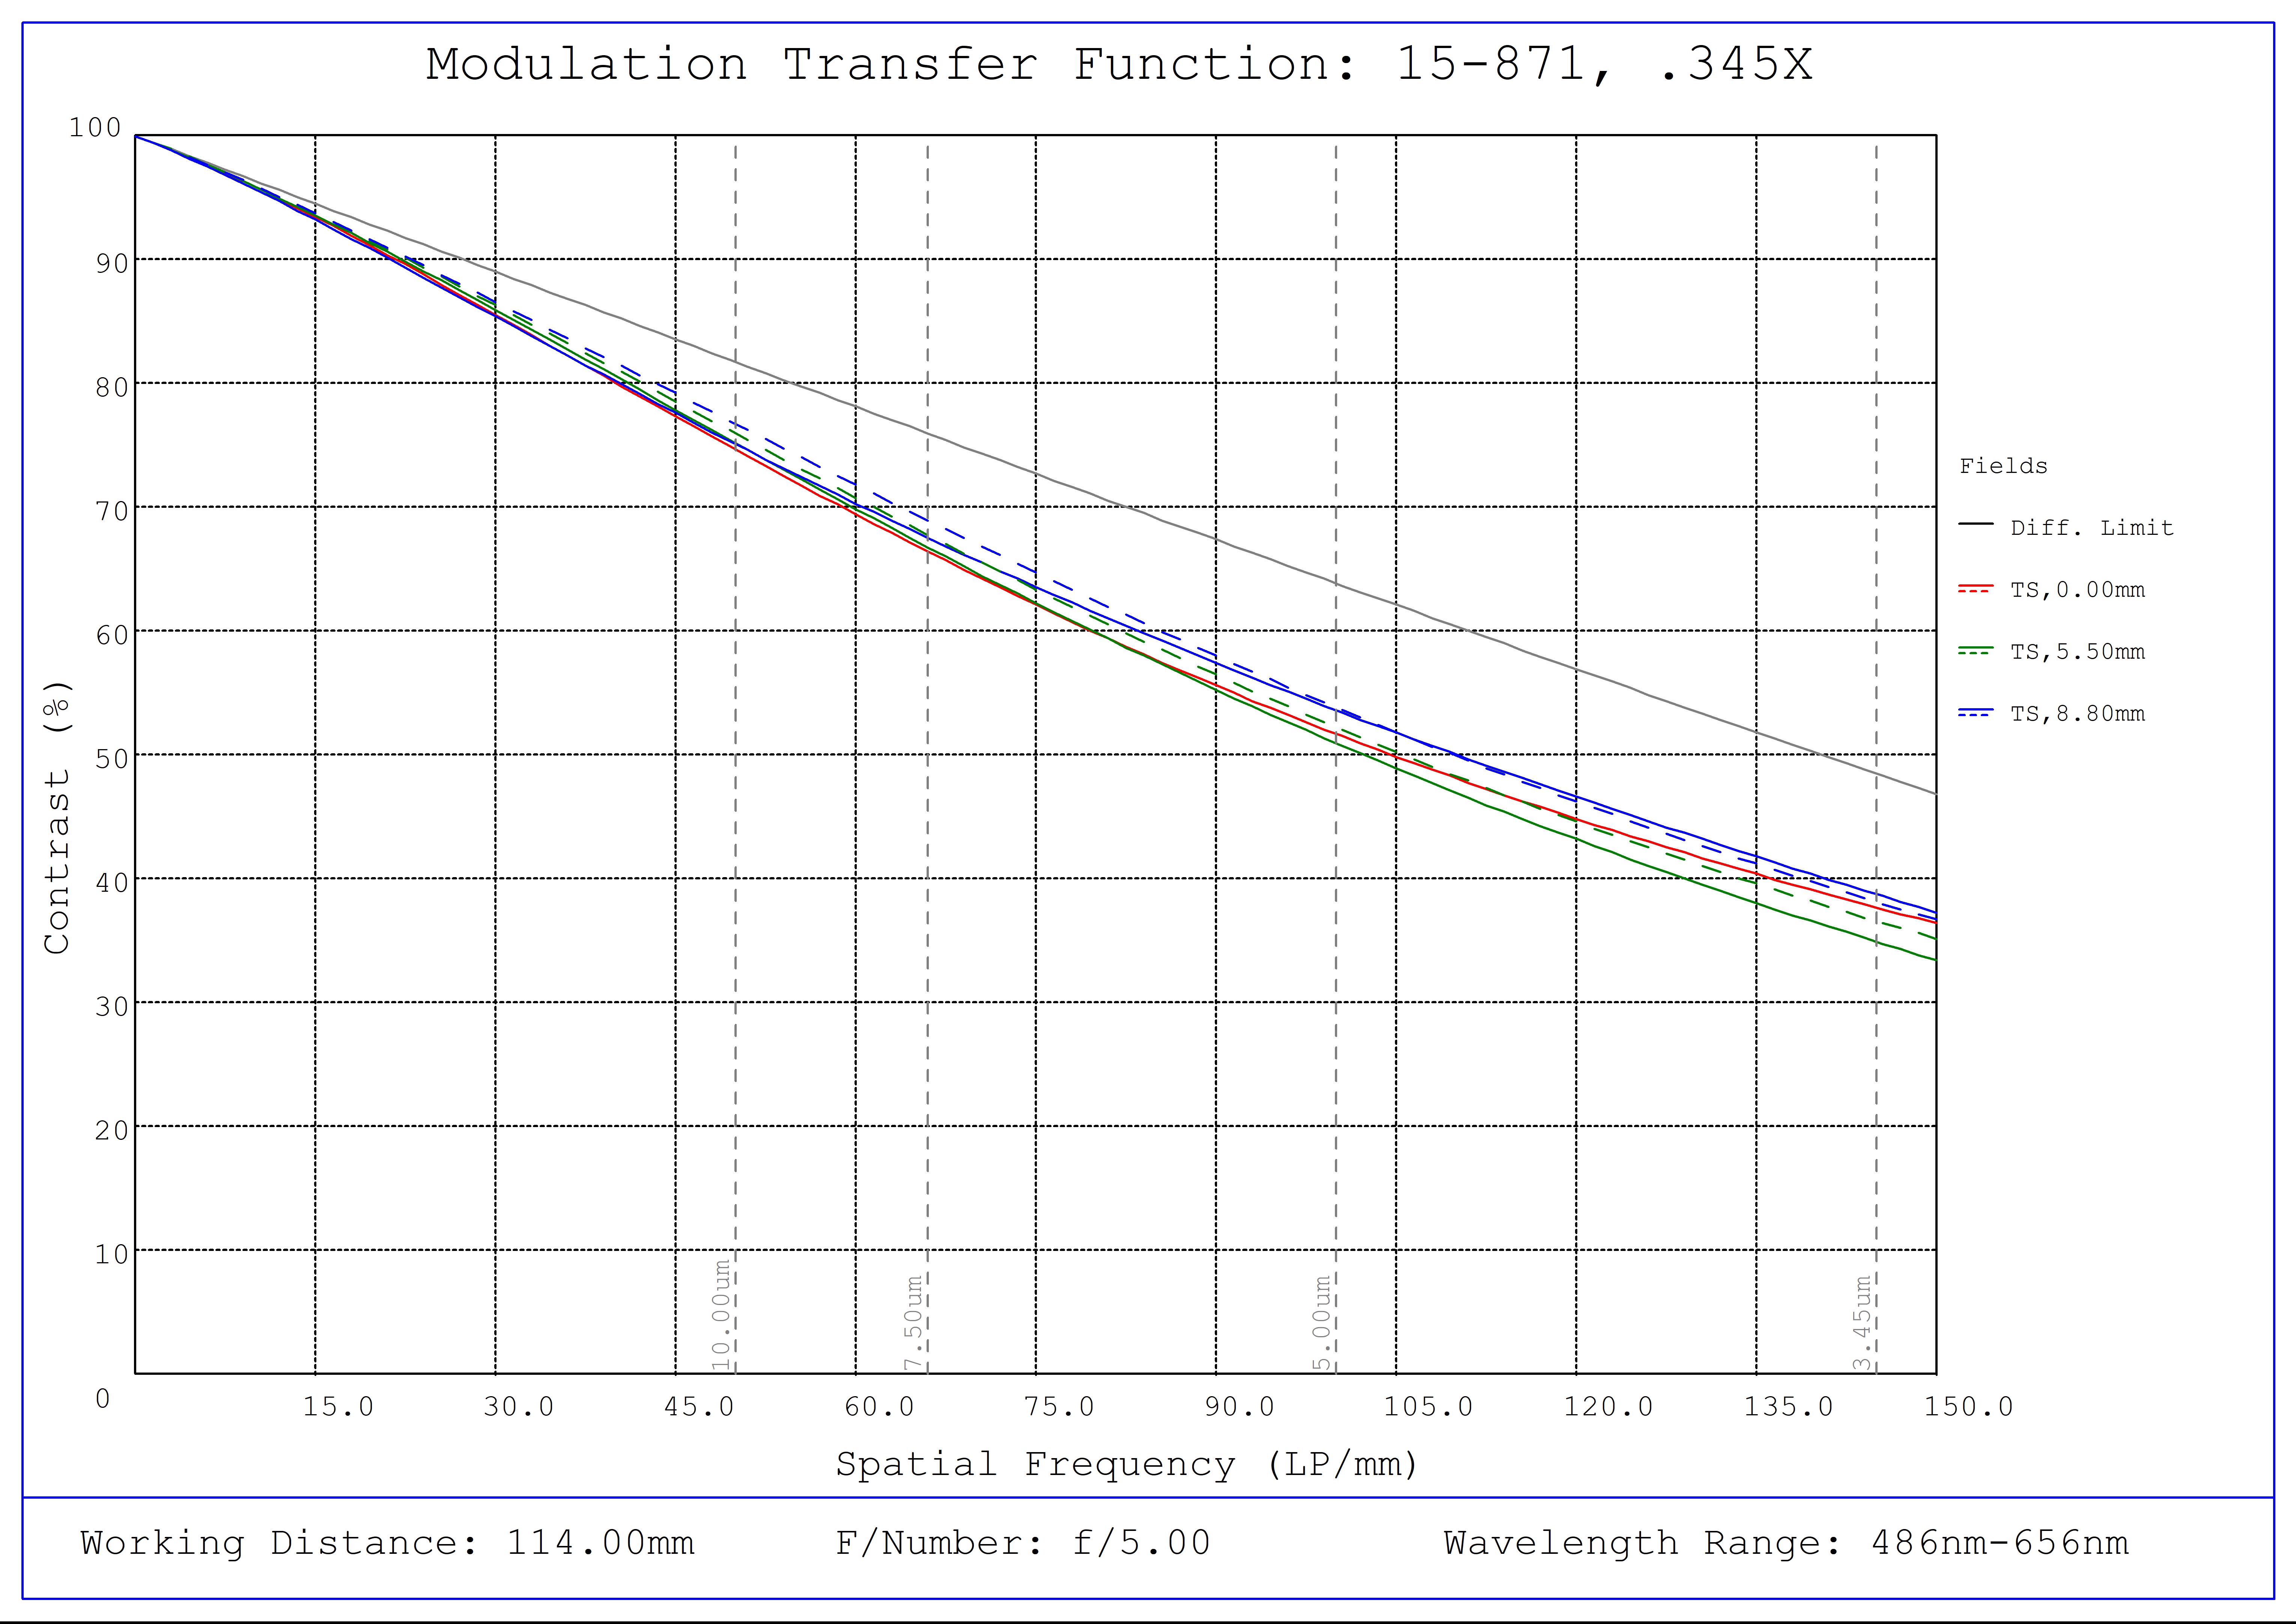 #15-871, 0.345X In-Line CobaltTL Telecentric Lens, Modulated Transfer Function (MTF) Plot, 114mm Working Distance, f5